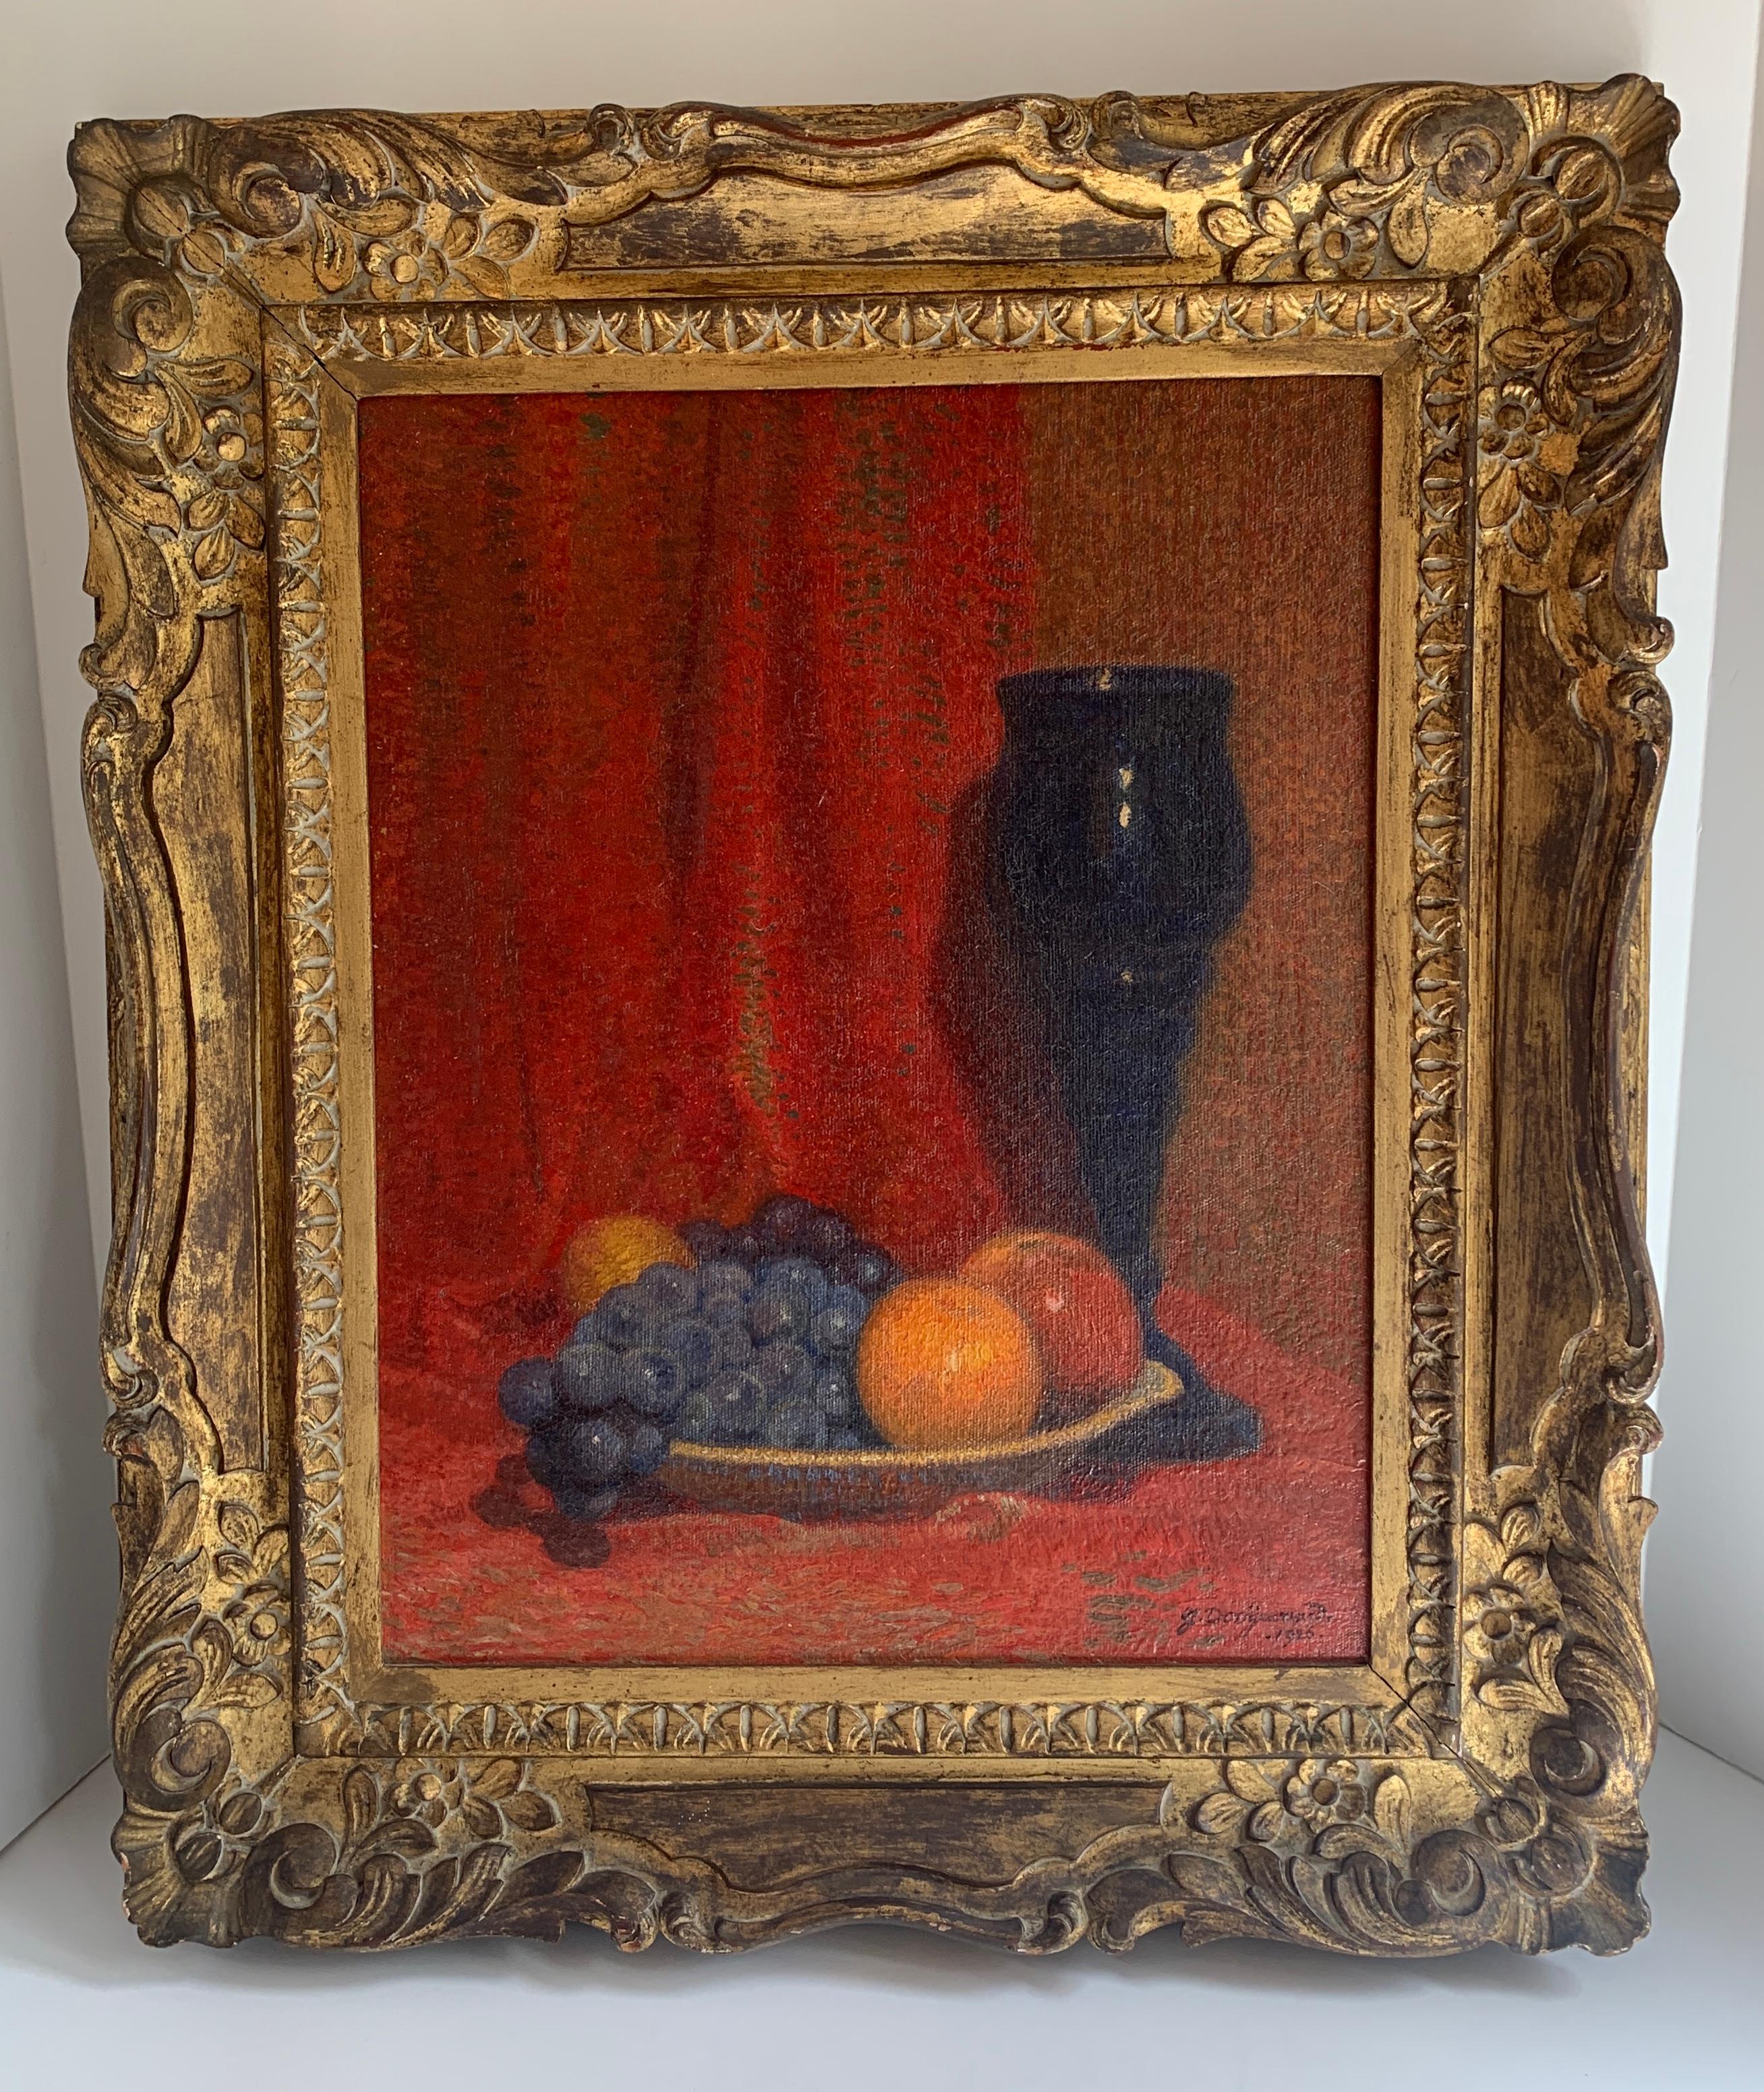 Oil on canvas painting by Dutch Artist Jacob Dooijewaard, dated 1926. A wonderfully composed painting of fruit with an Urn... Honestly a stunning statement piece with an equally wonderful frame.

Image area of the painting is: 13.5 W x 17.5